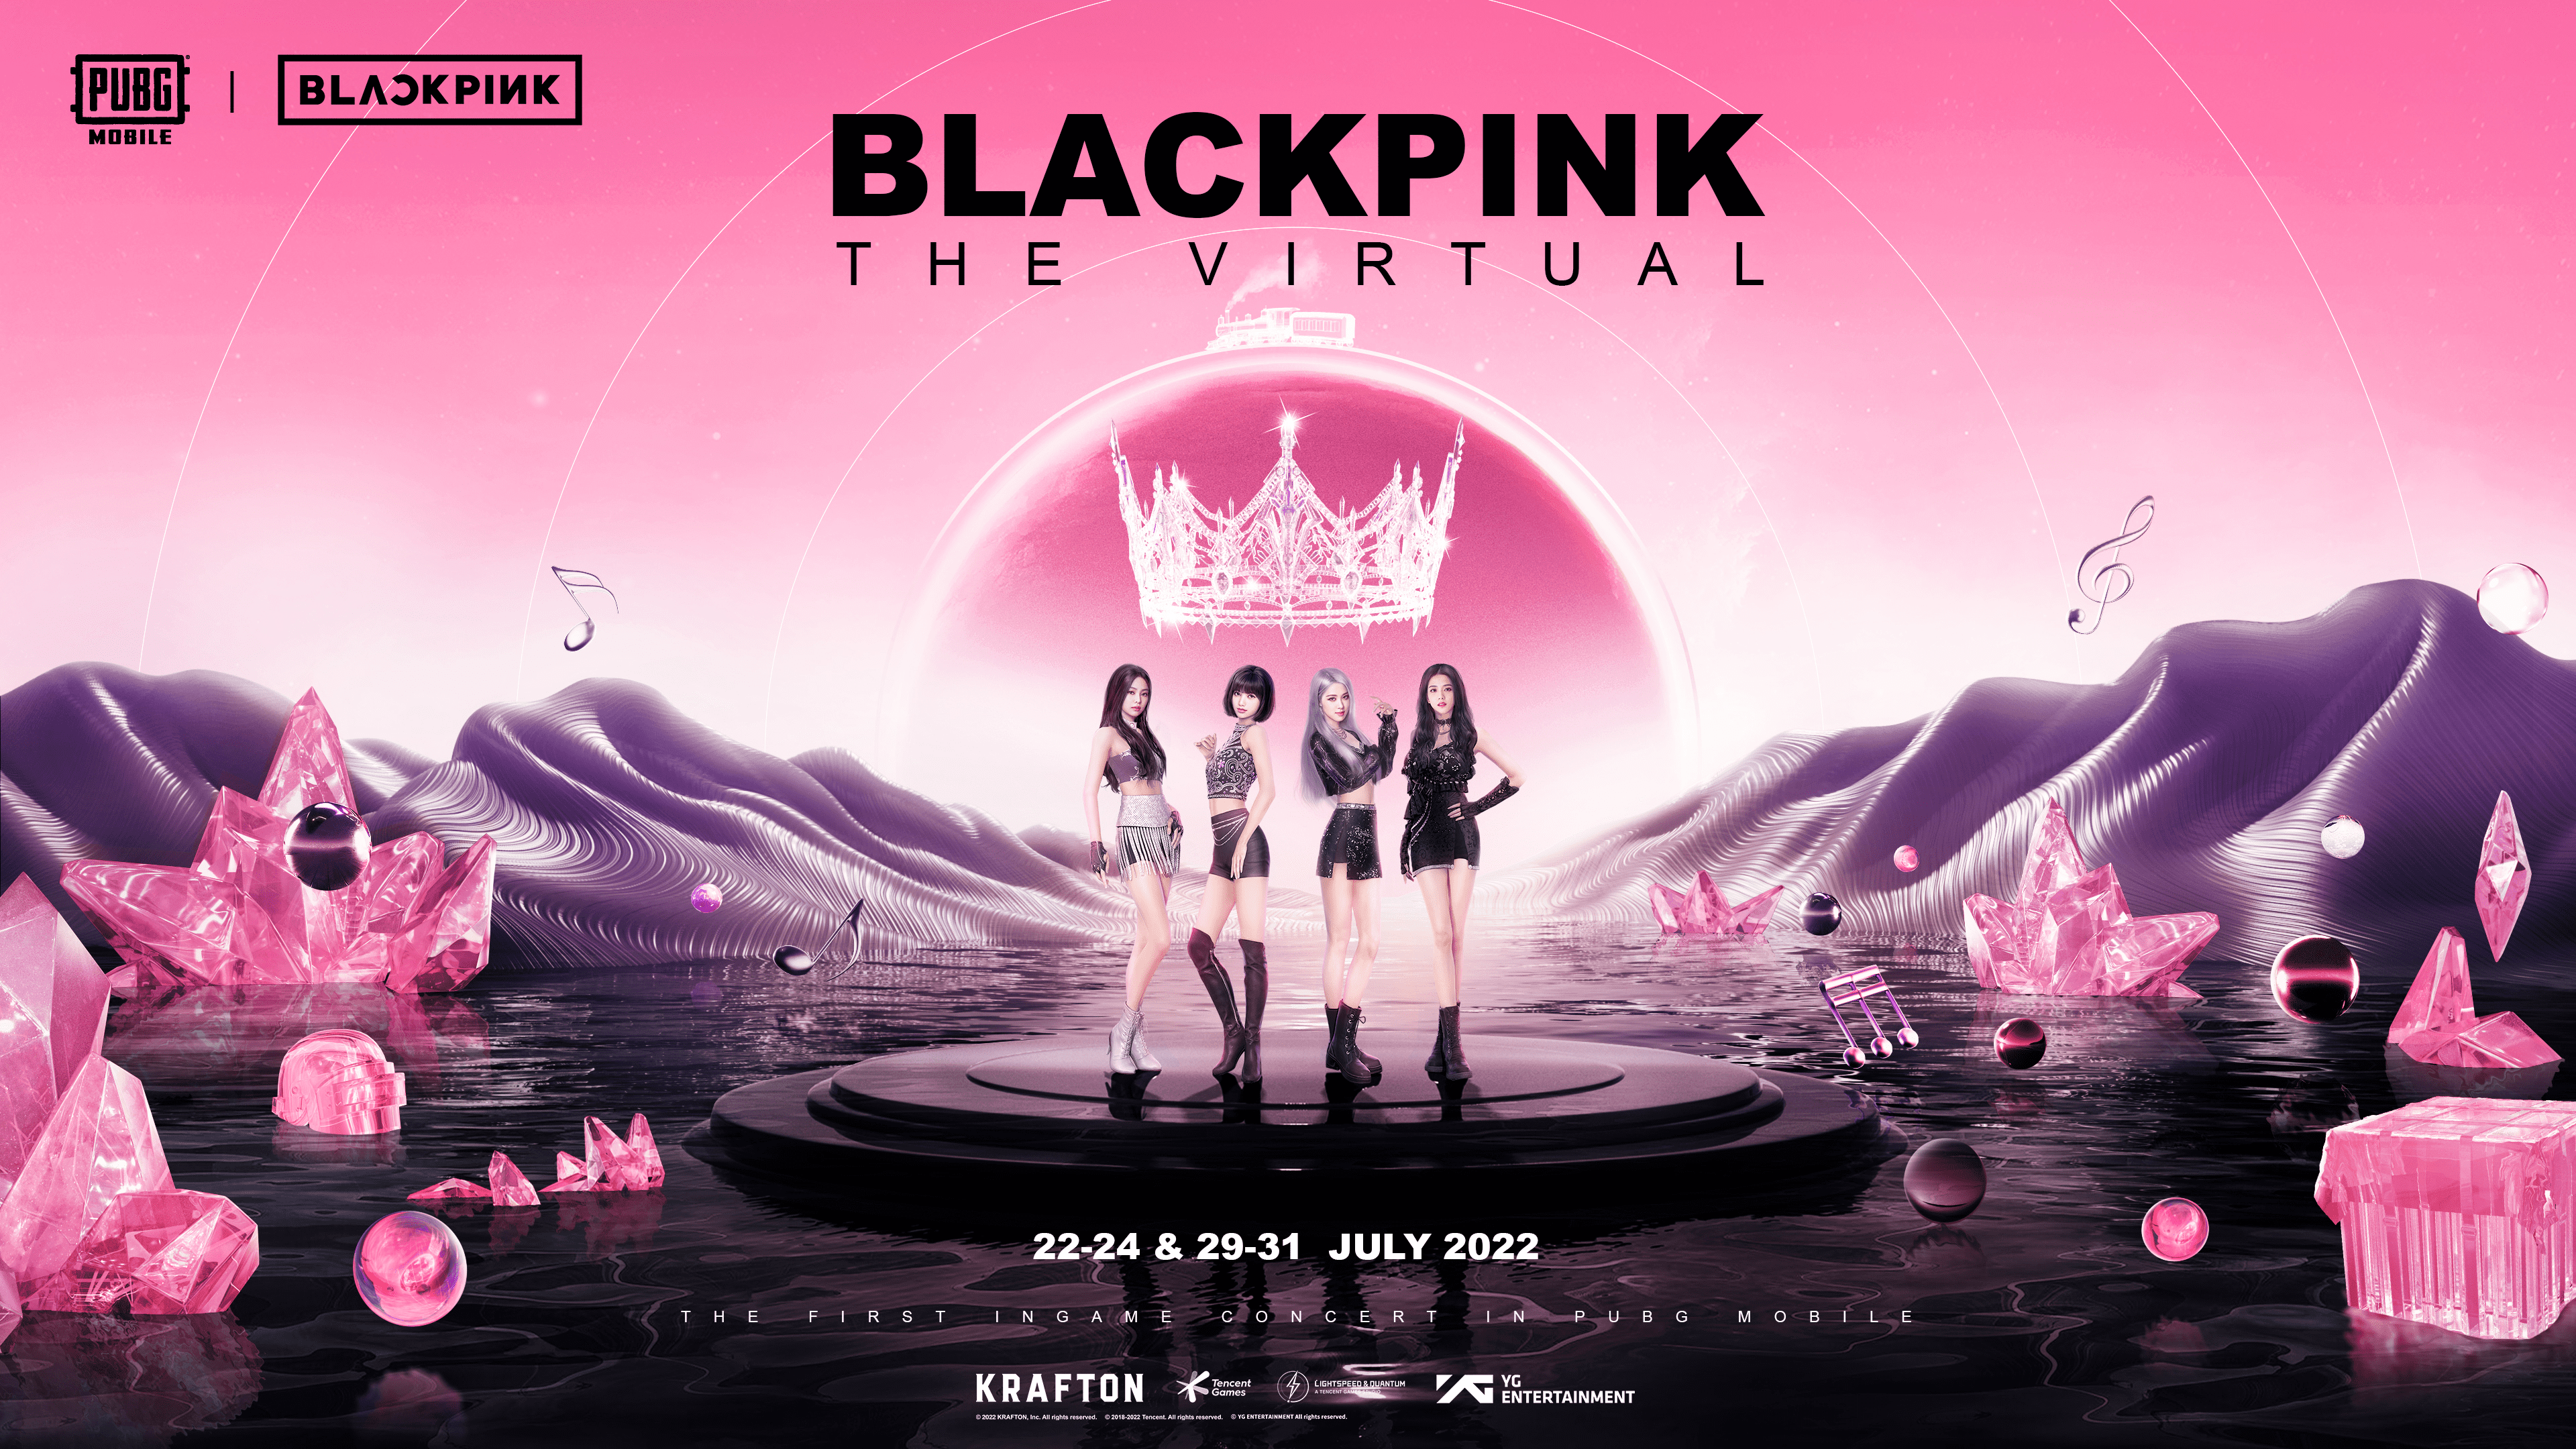 https://static.wikia.nocookie.net/kpop/images/8/8c/BLACKPINK_The_Virtual_announcement_poster.png/revision/latest?cb=20220729160435